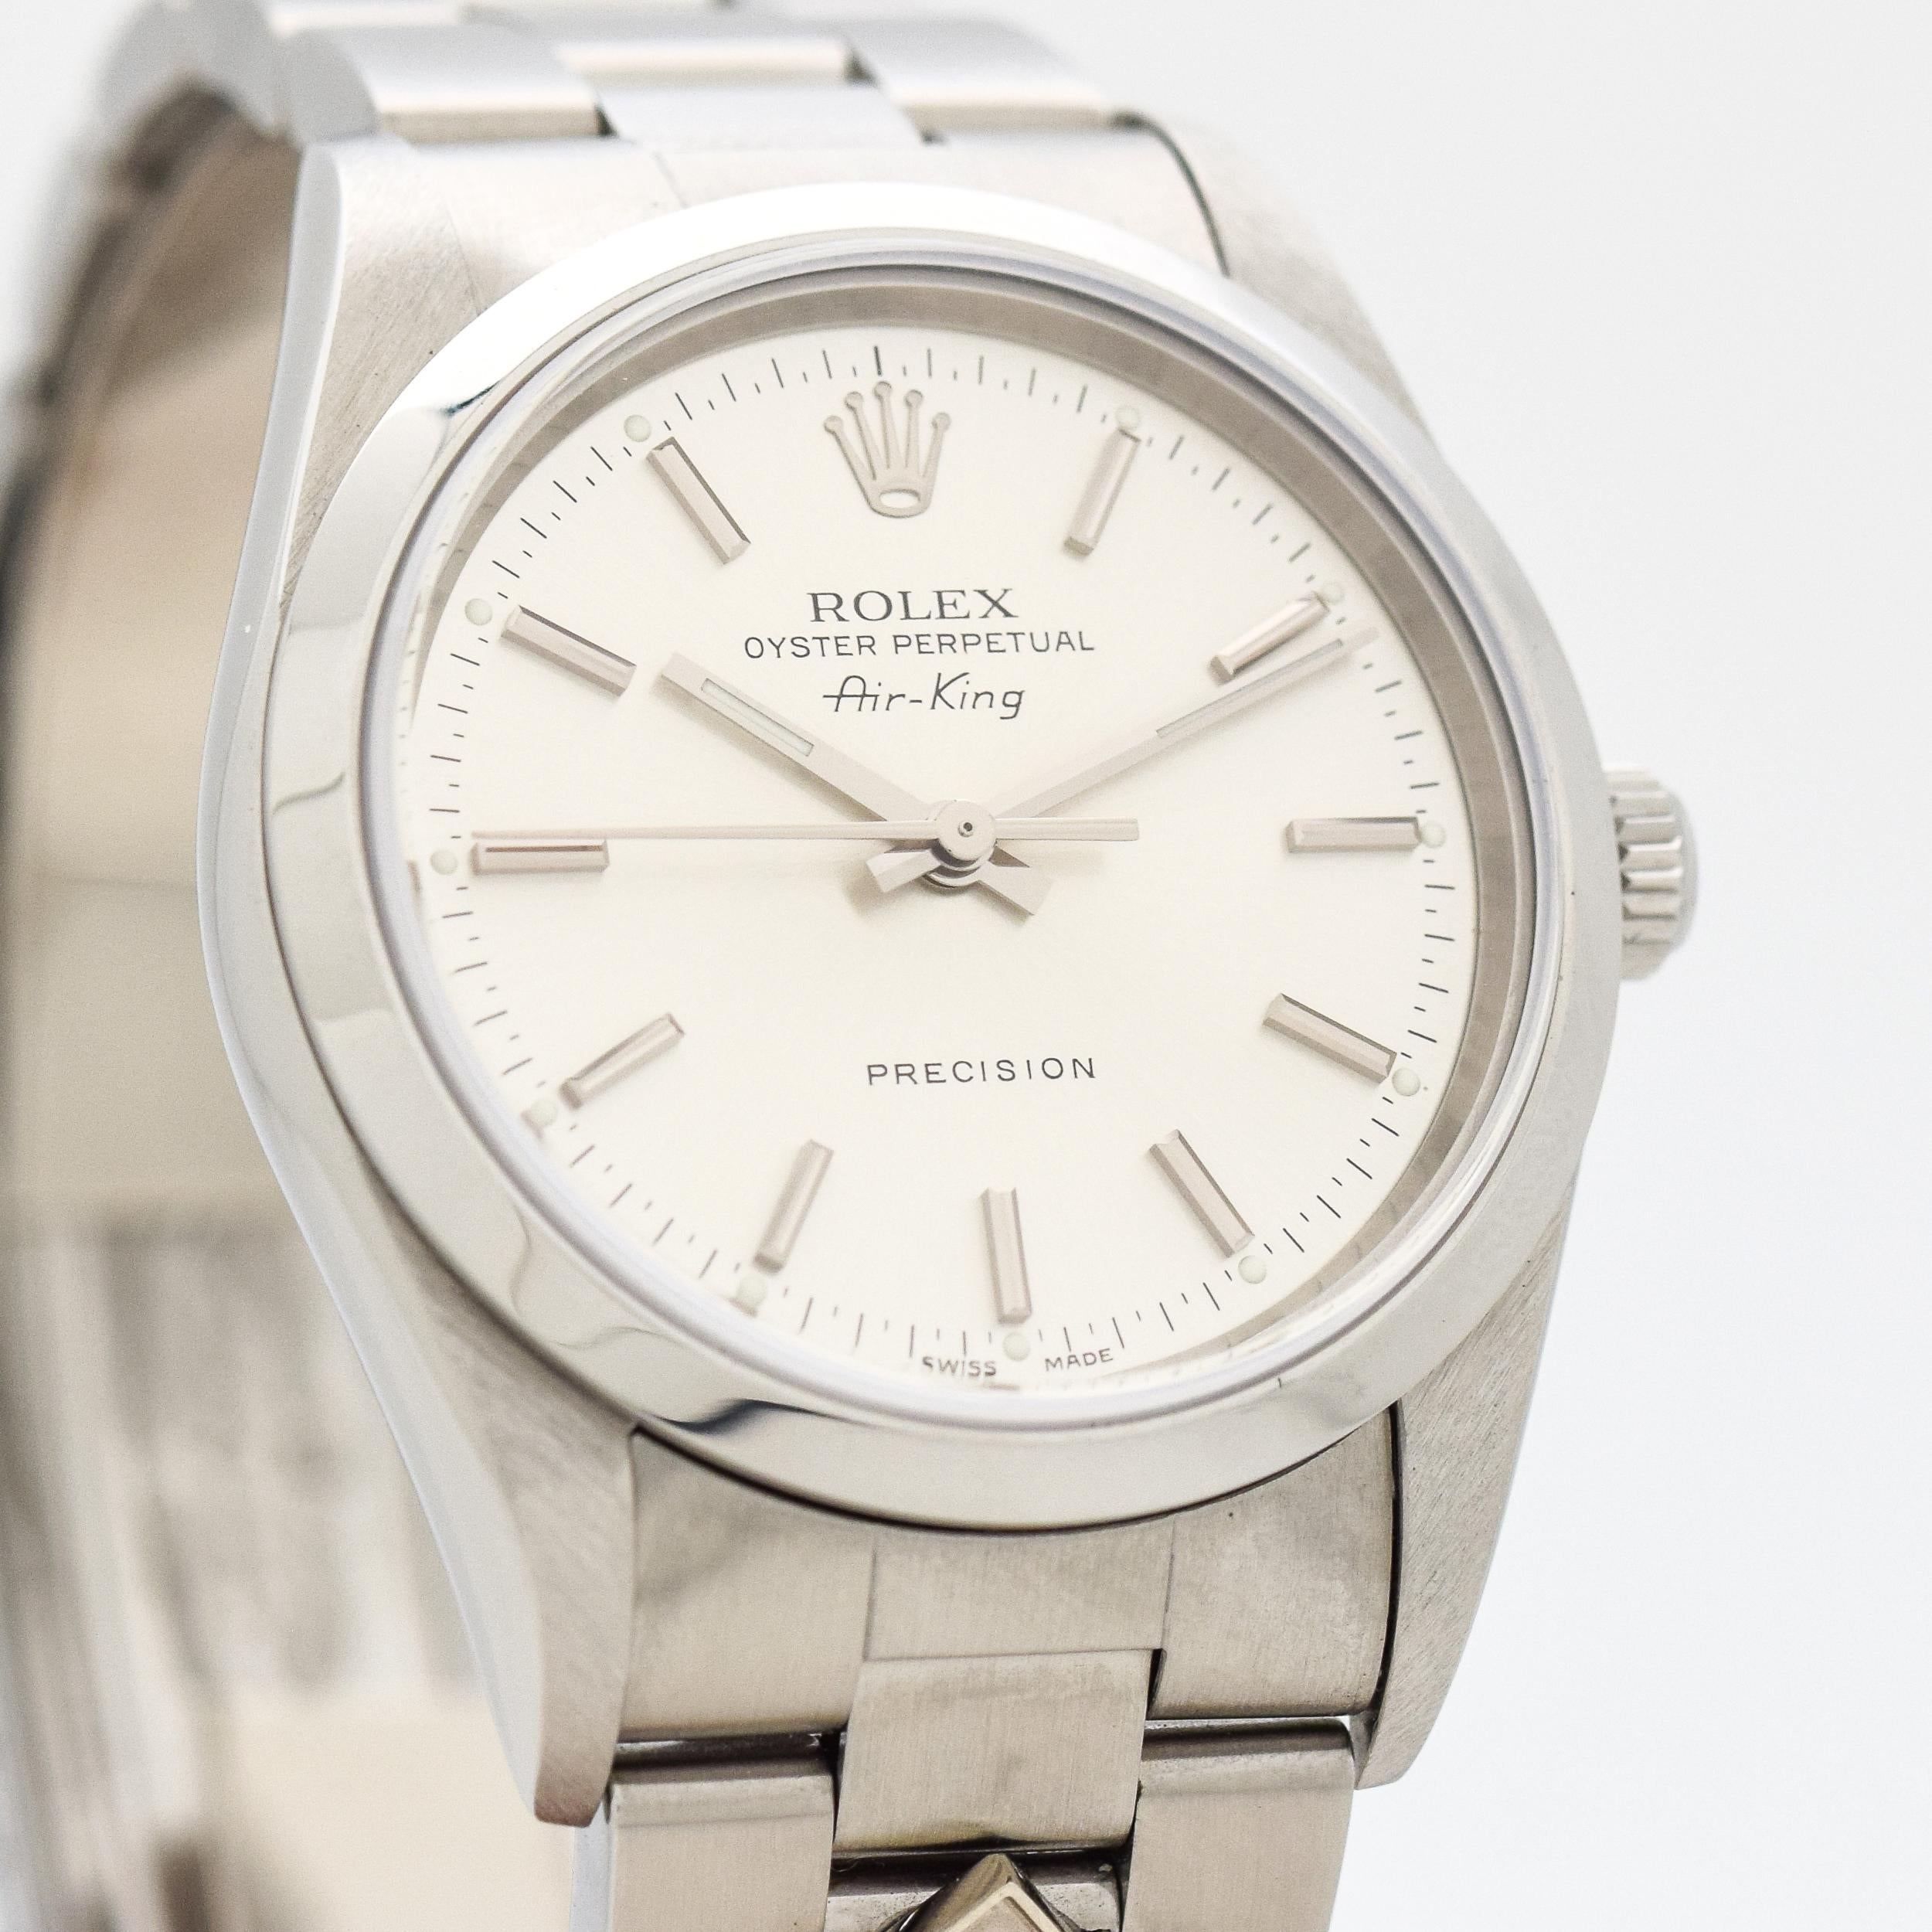 2006 Rolex Air-King Ref. 14000 M Stainless Steel Domino's (These watches were typically rewarded to Domino's Pizza Managers that meet certain high sales goals) watch with Original Rolex Papers with Original Silver Dial with Applied Steel